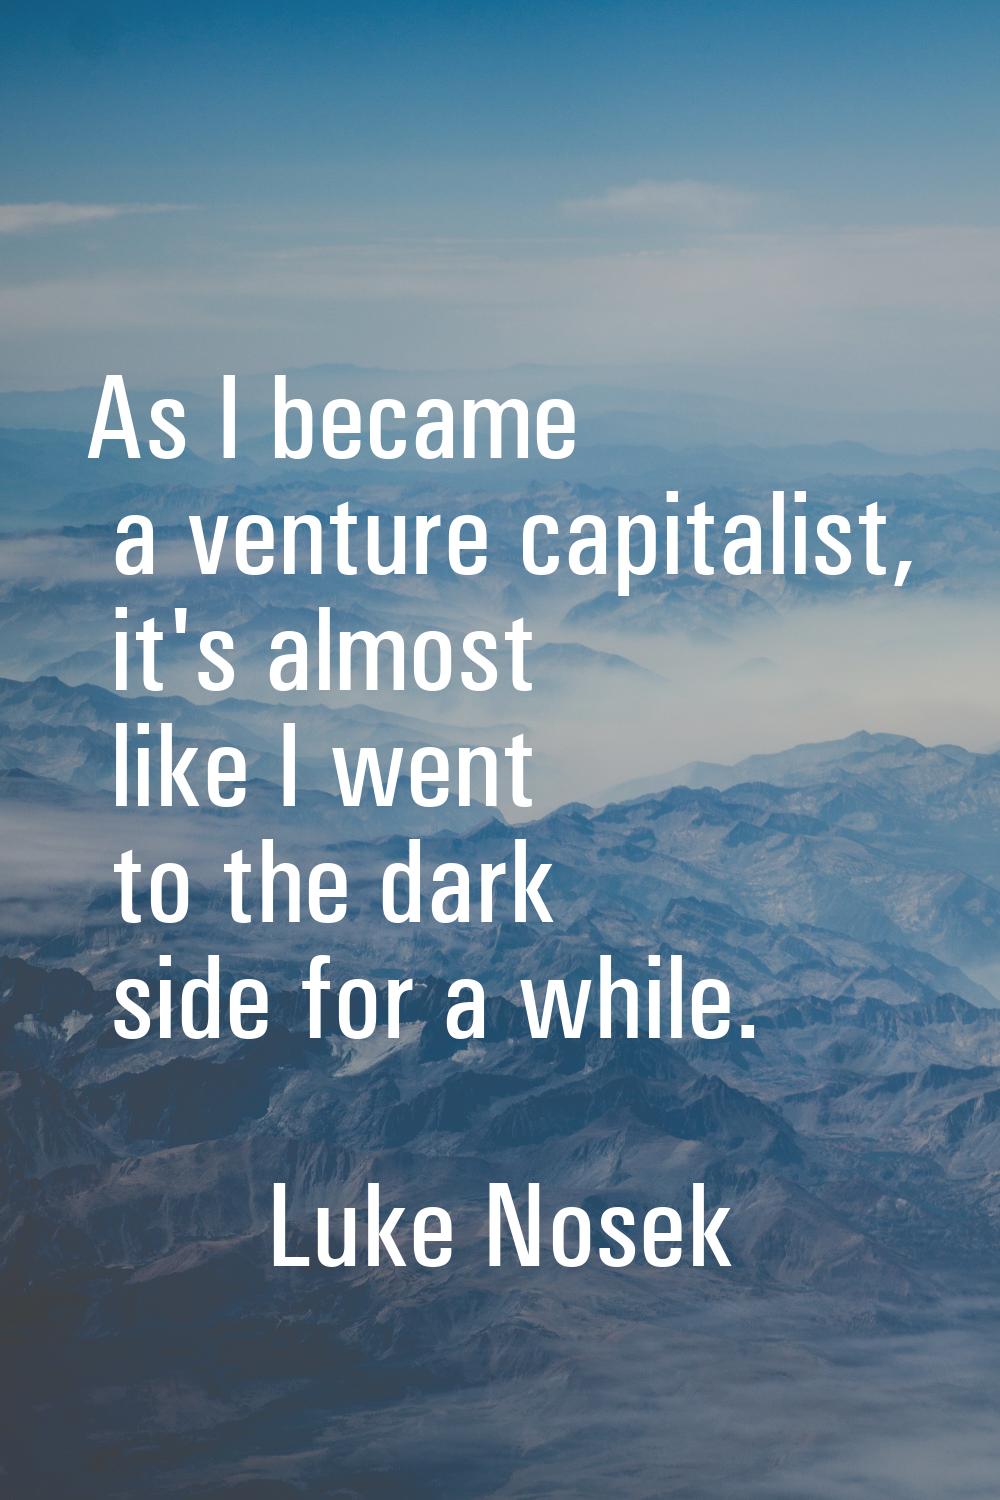 As I became a venture capitalist, it's almost like I went to the dark side for a while.